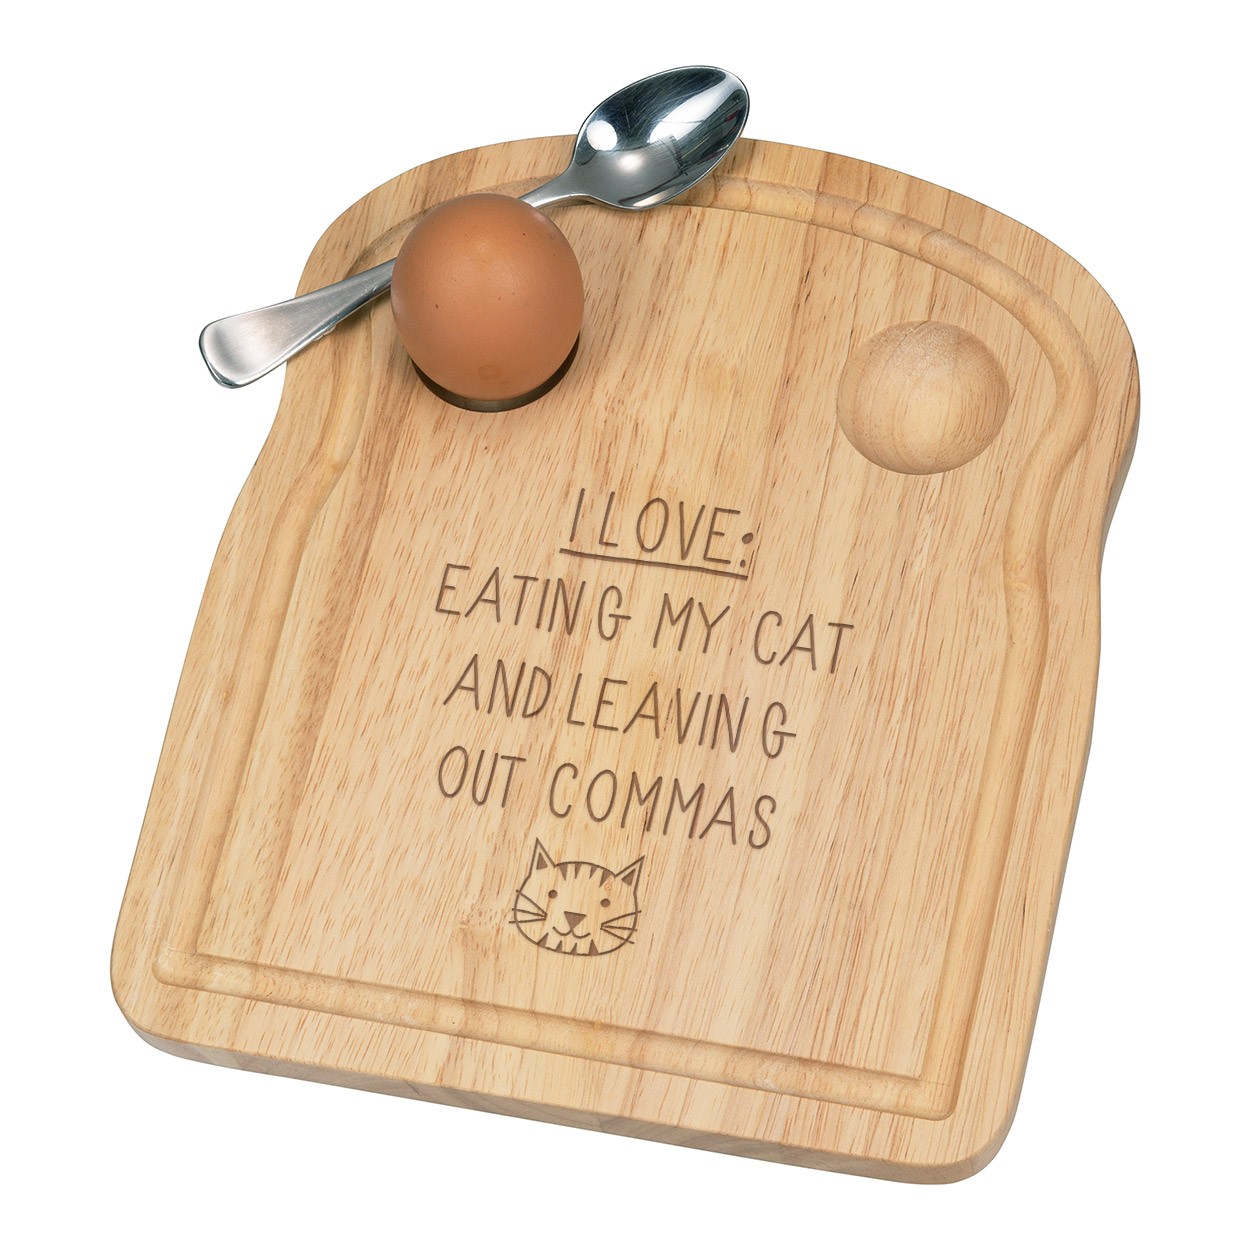 I Love Eating My Cat and Leaving Out Commas Breakfast Dippy Egg Cup Board Wooden